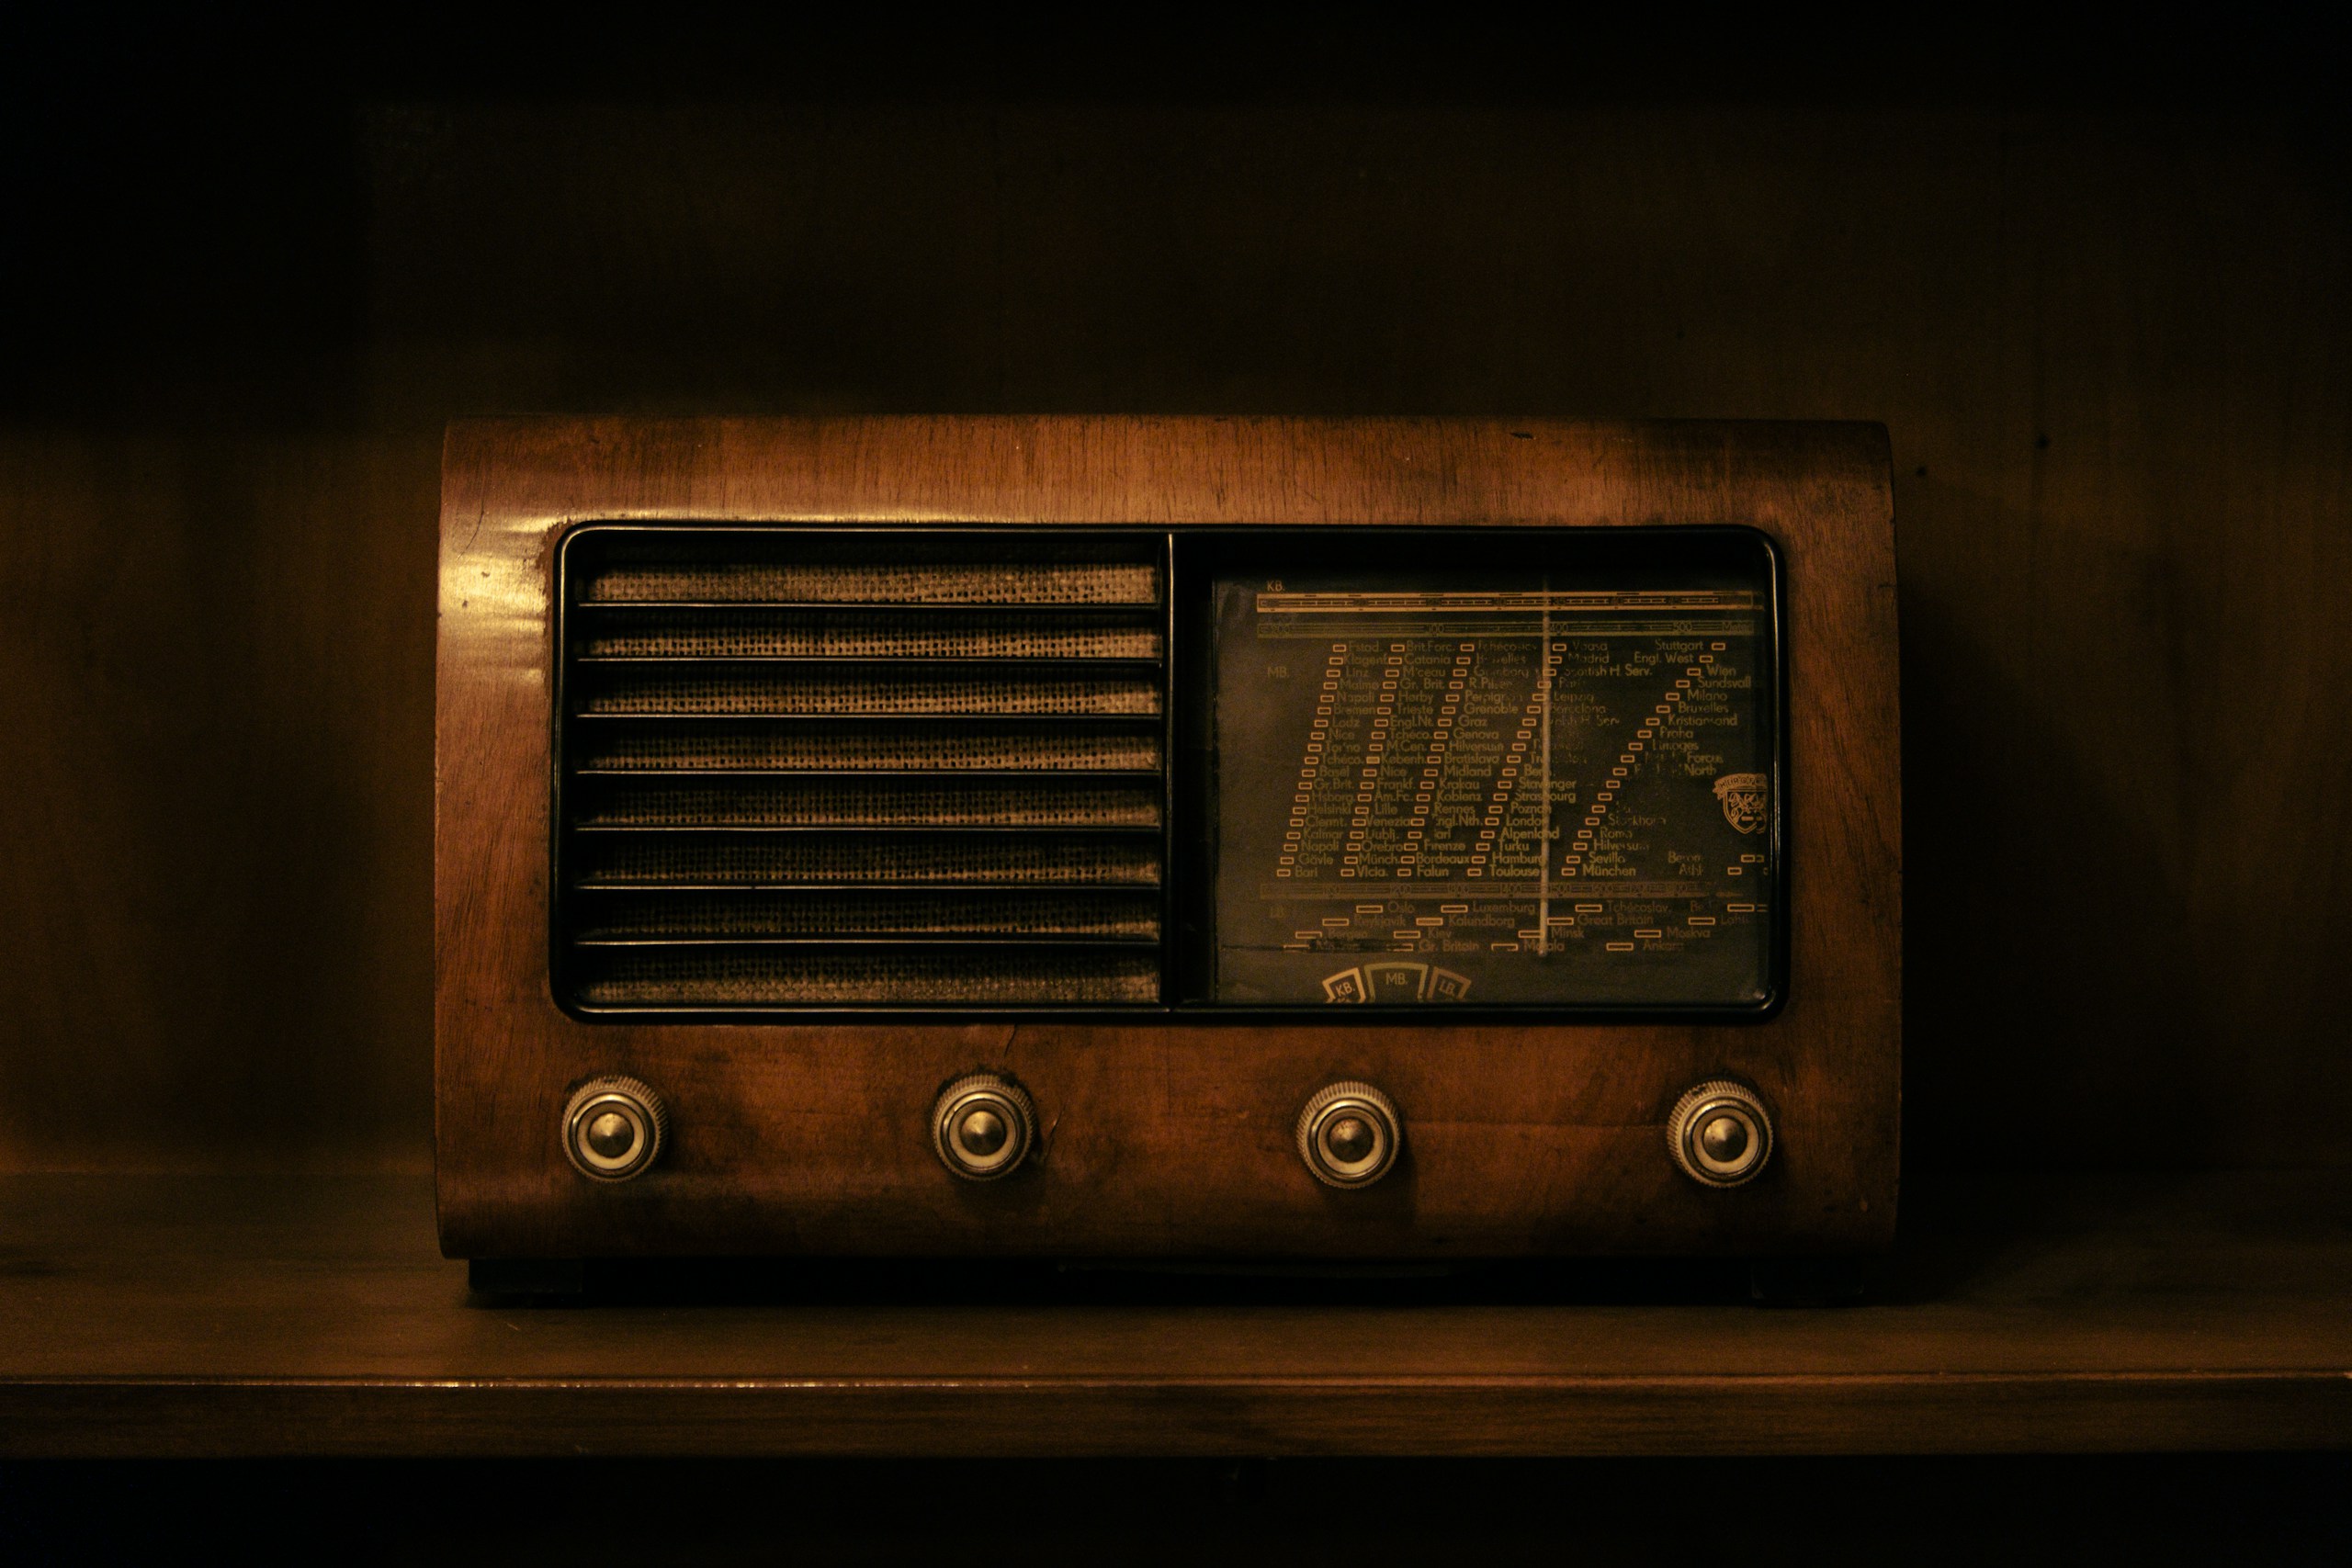 It's an old radio.